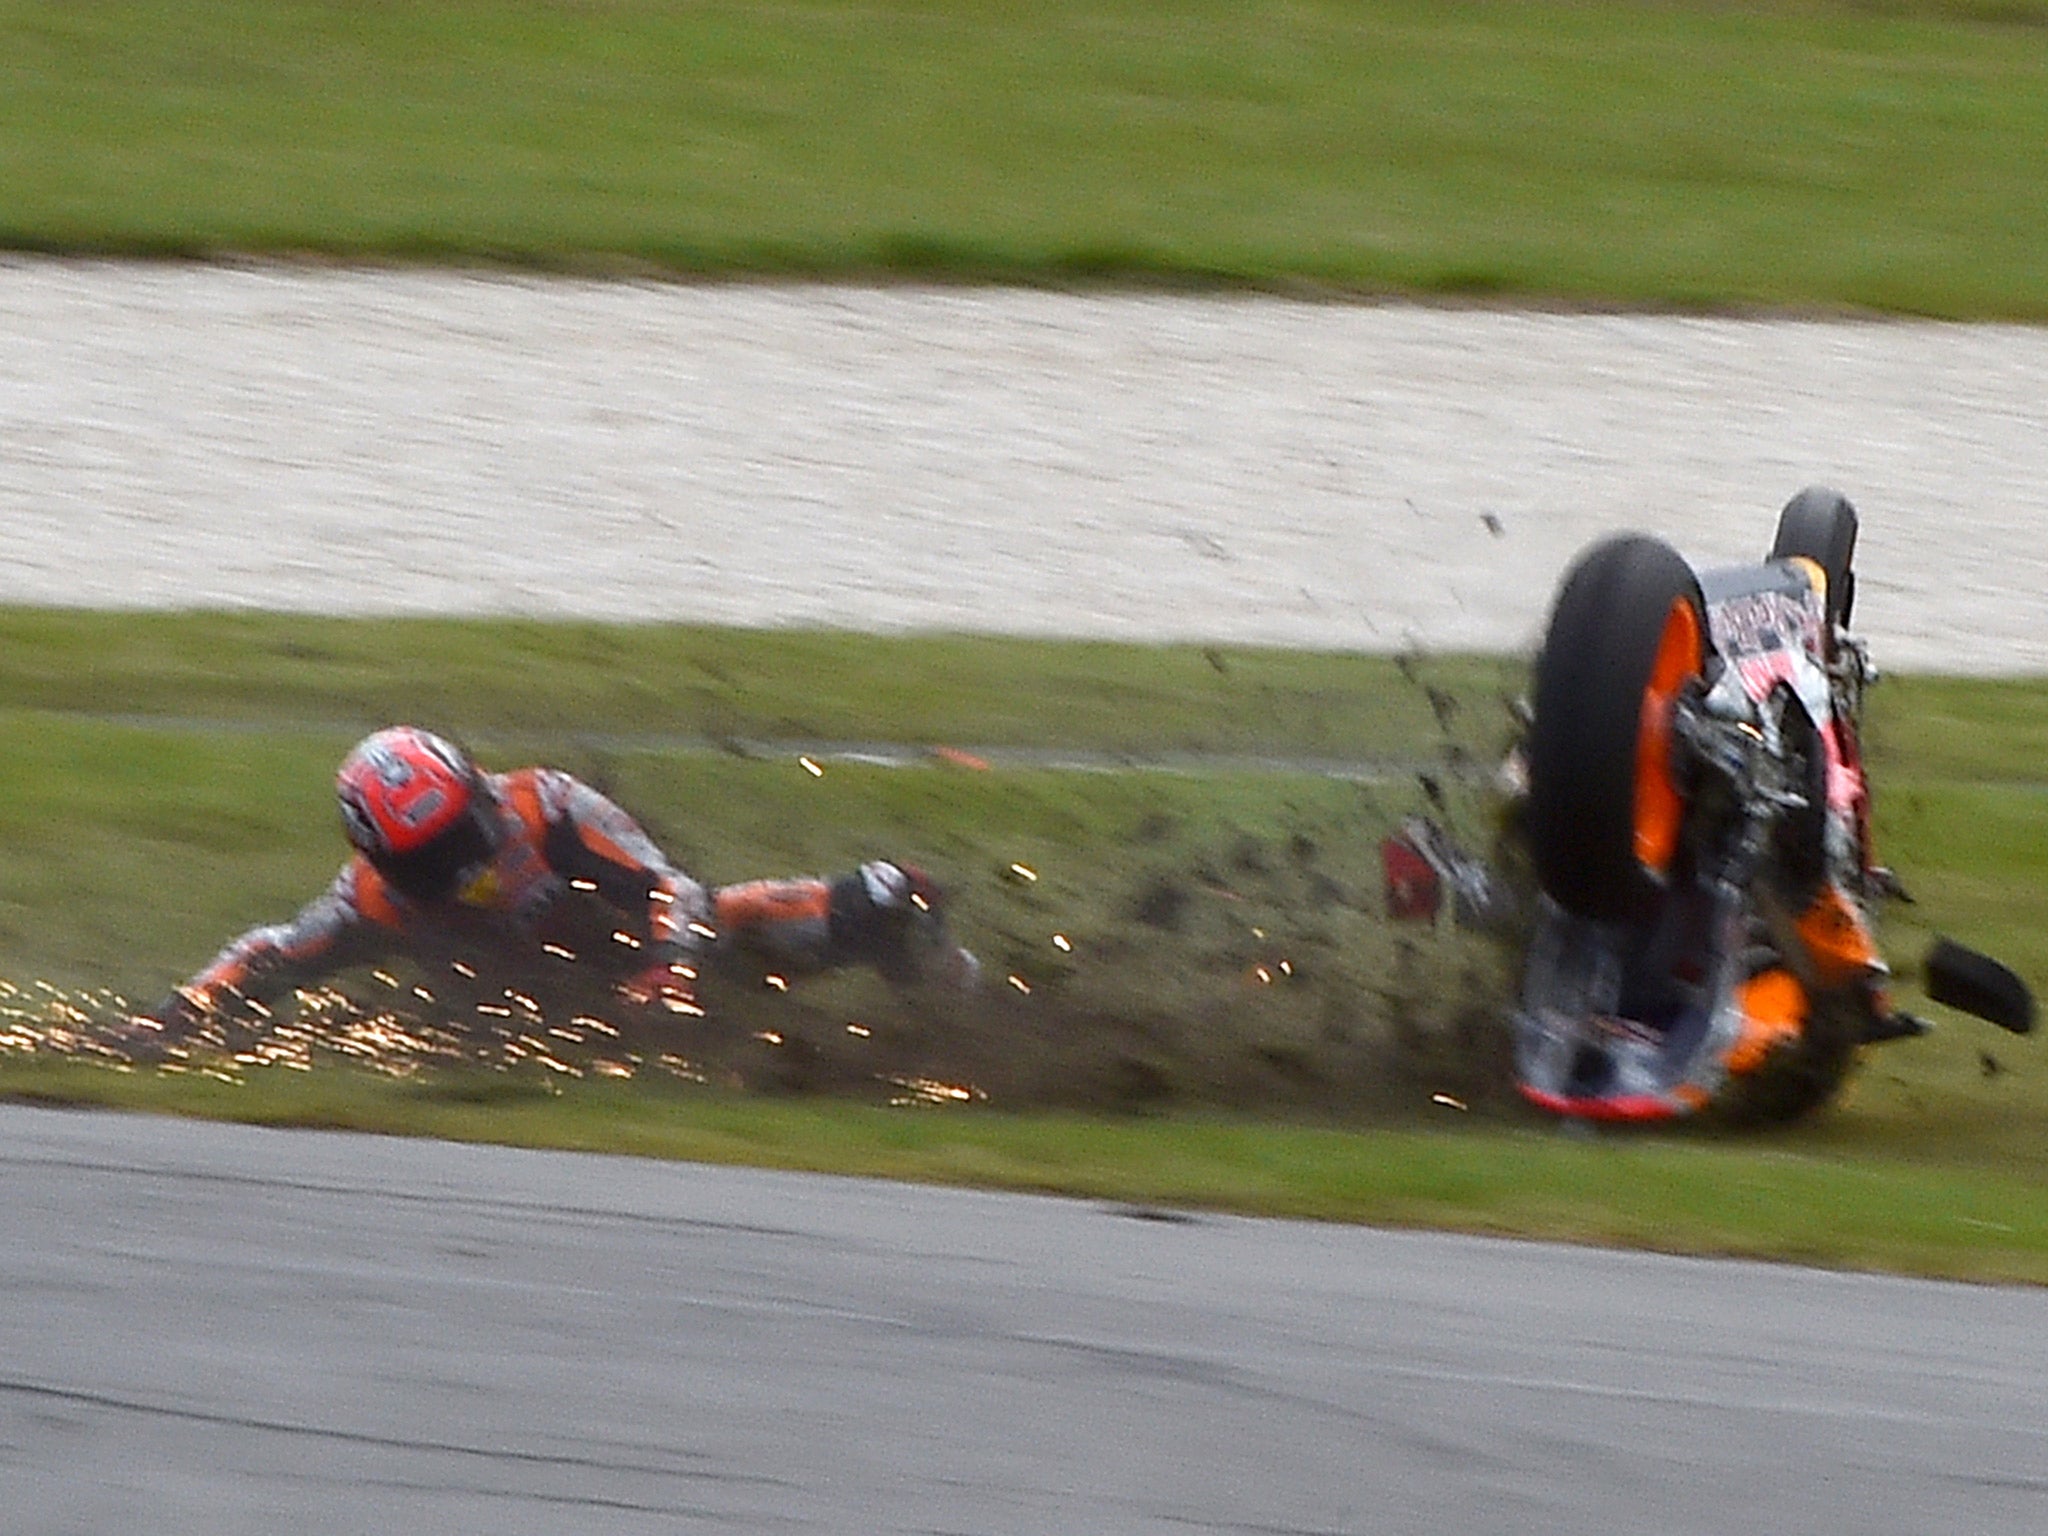 Marc Marquez crashed out of the race while leading